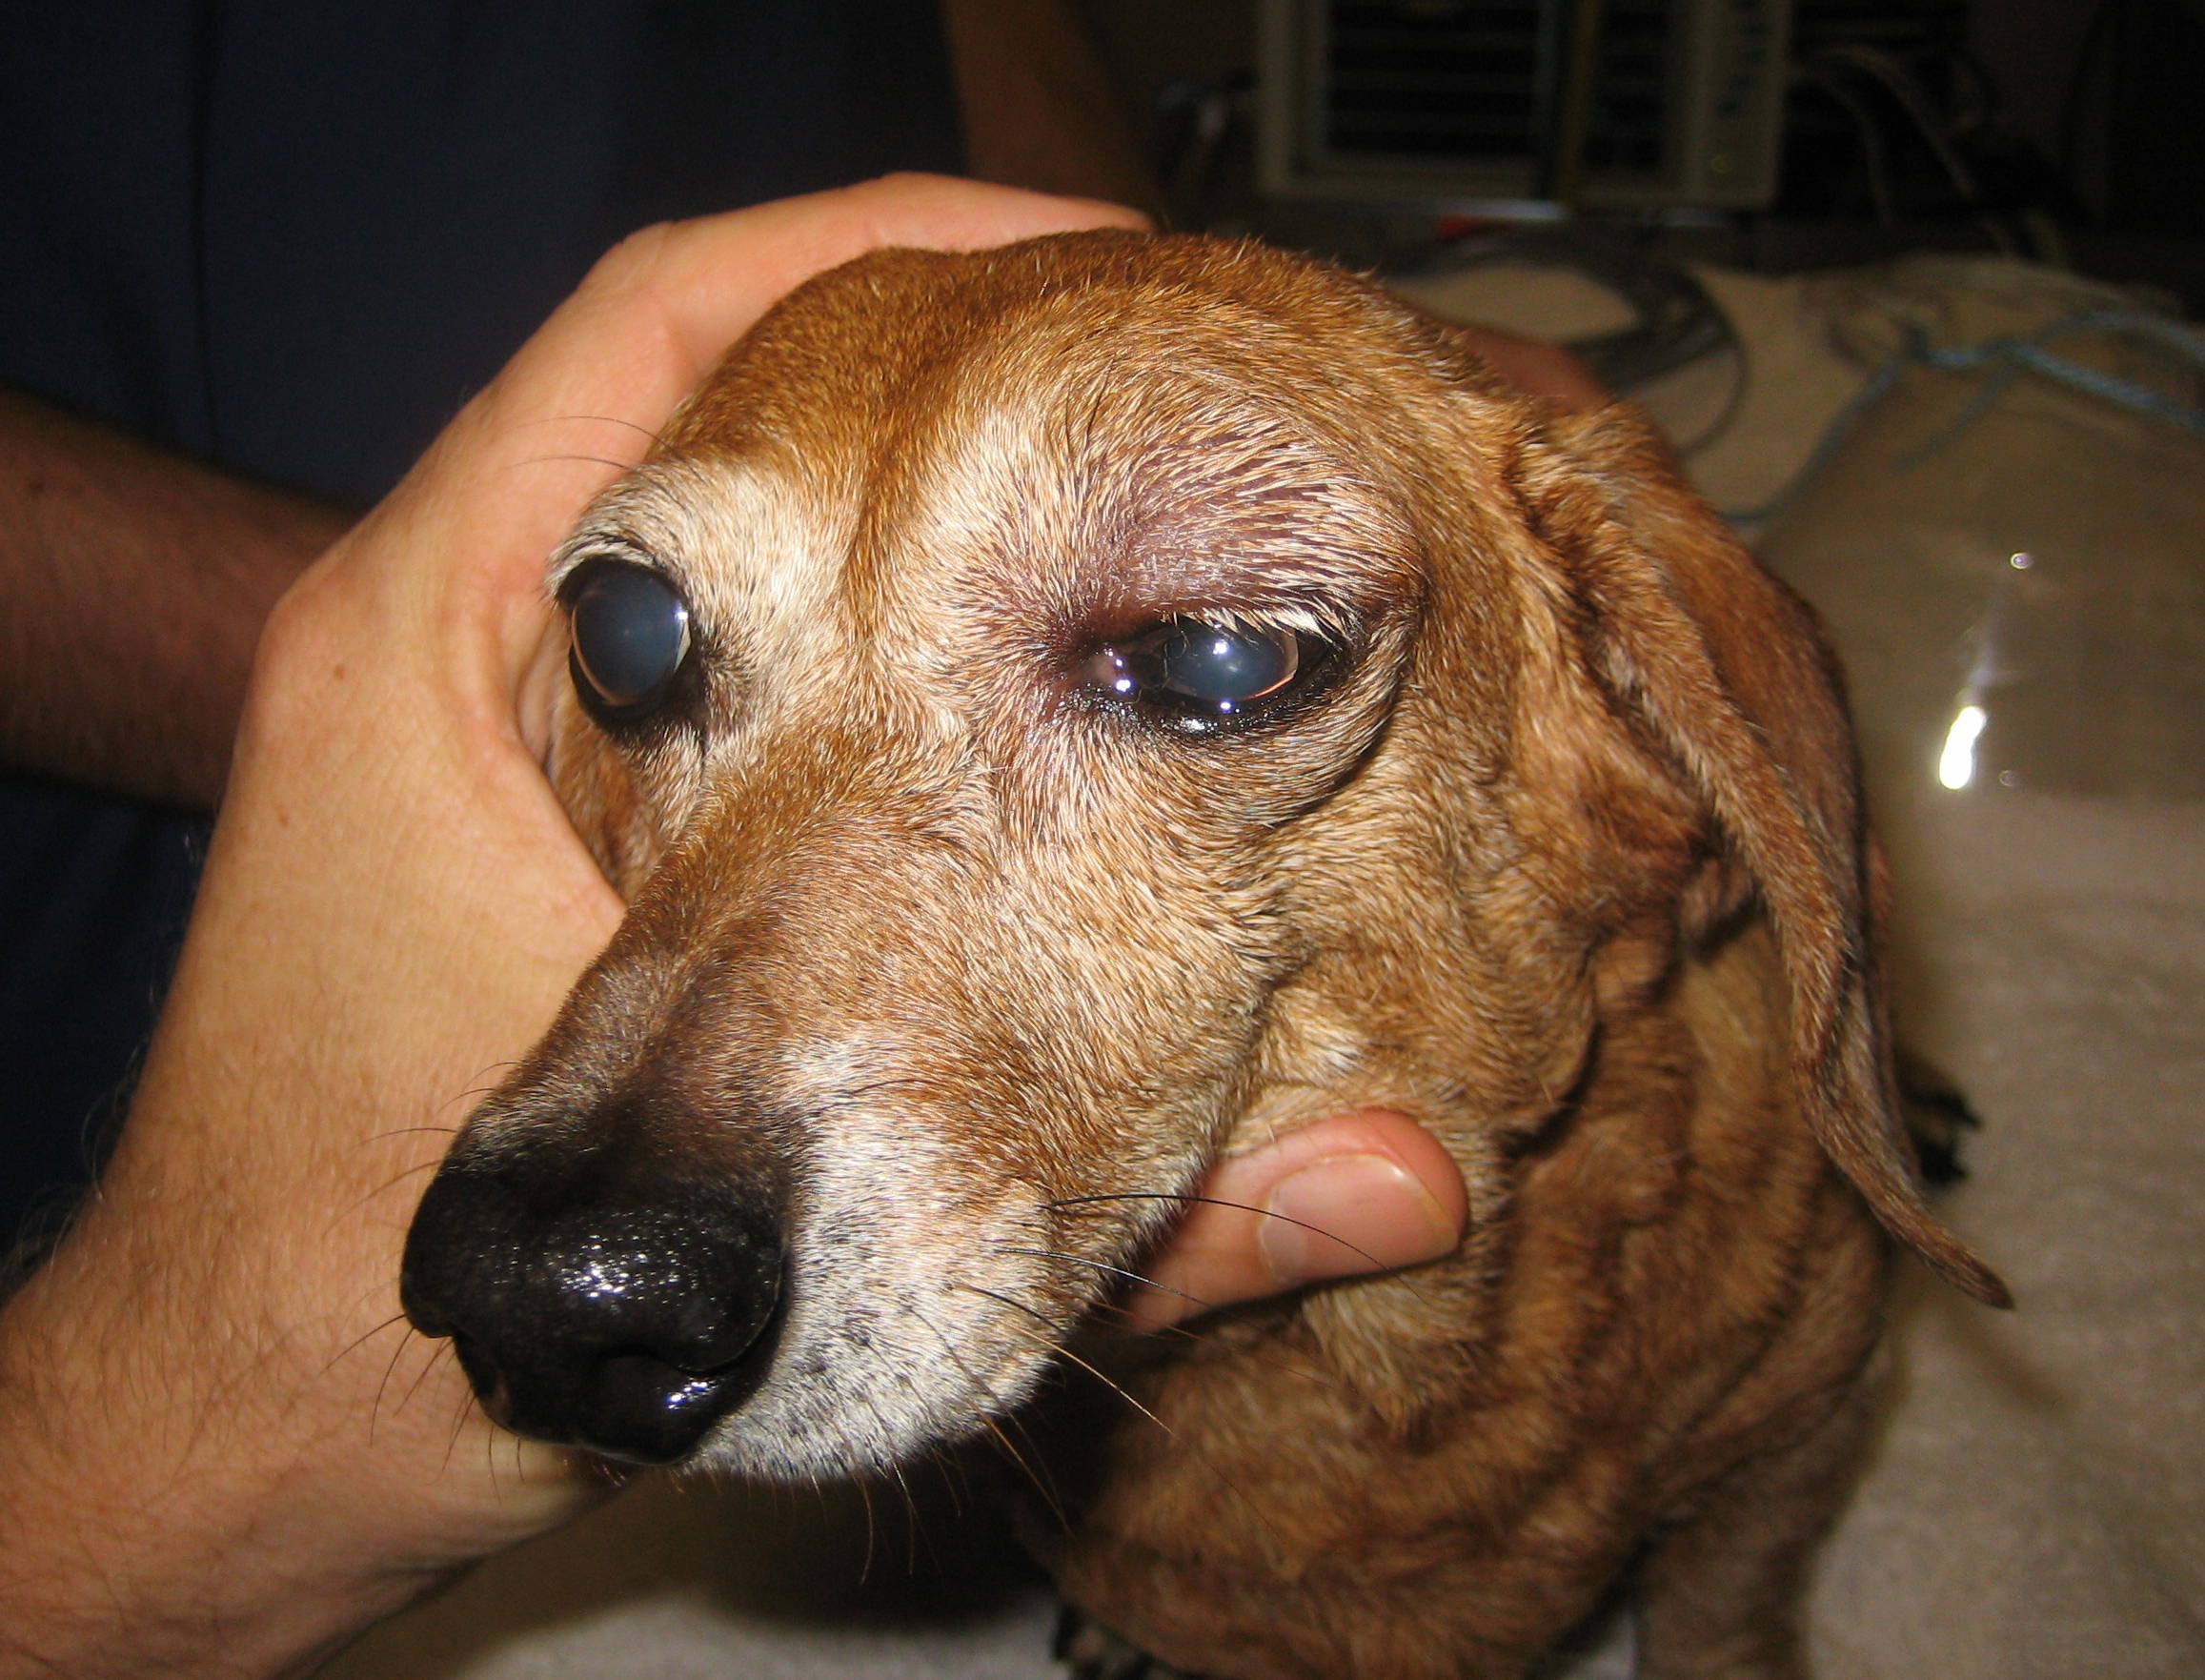 Orbital Cellulitis - Veterinary Ophthalmic Consulting